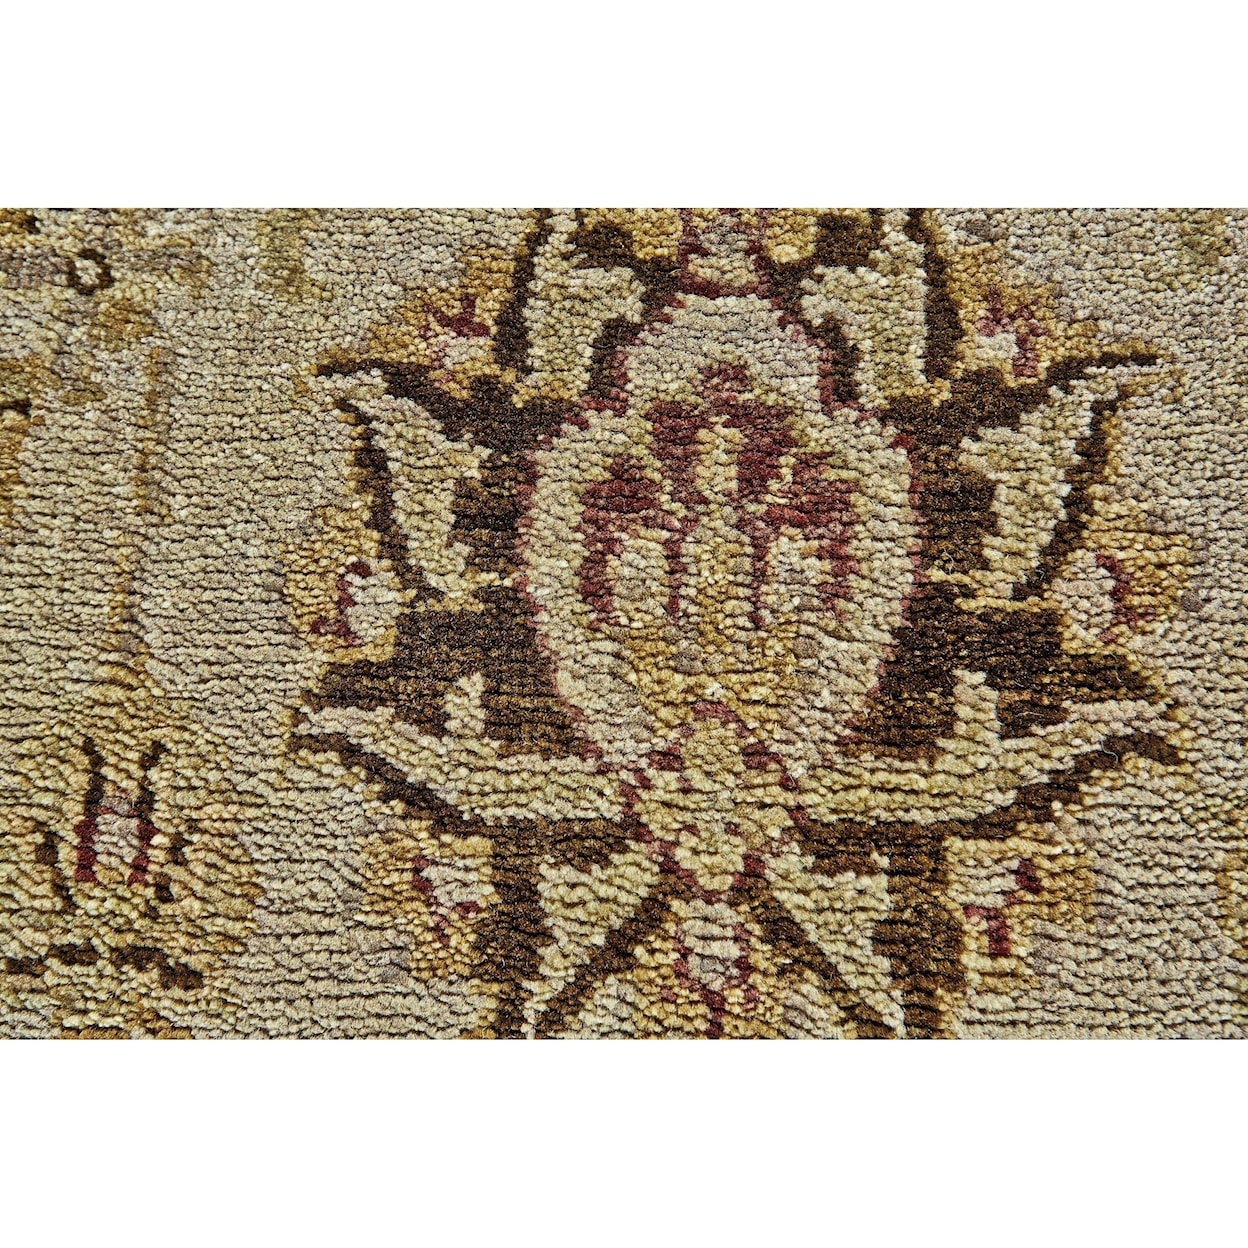 Feizy Rugs Drake Brown/Beige 4' x 6' Area Rug